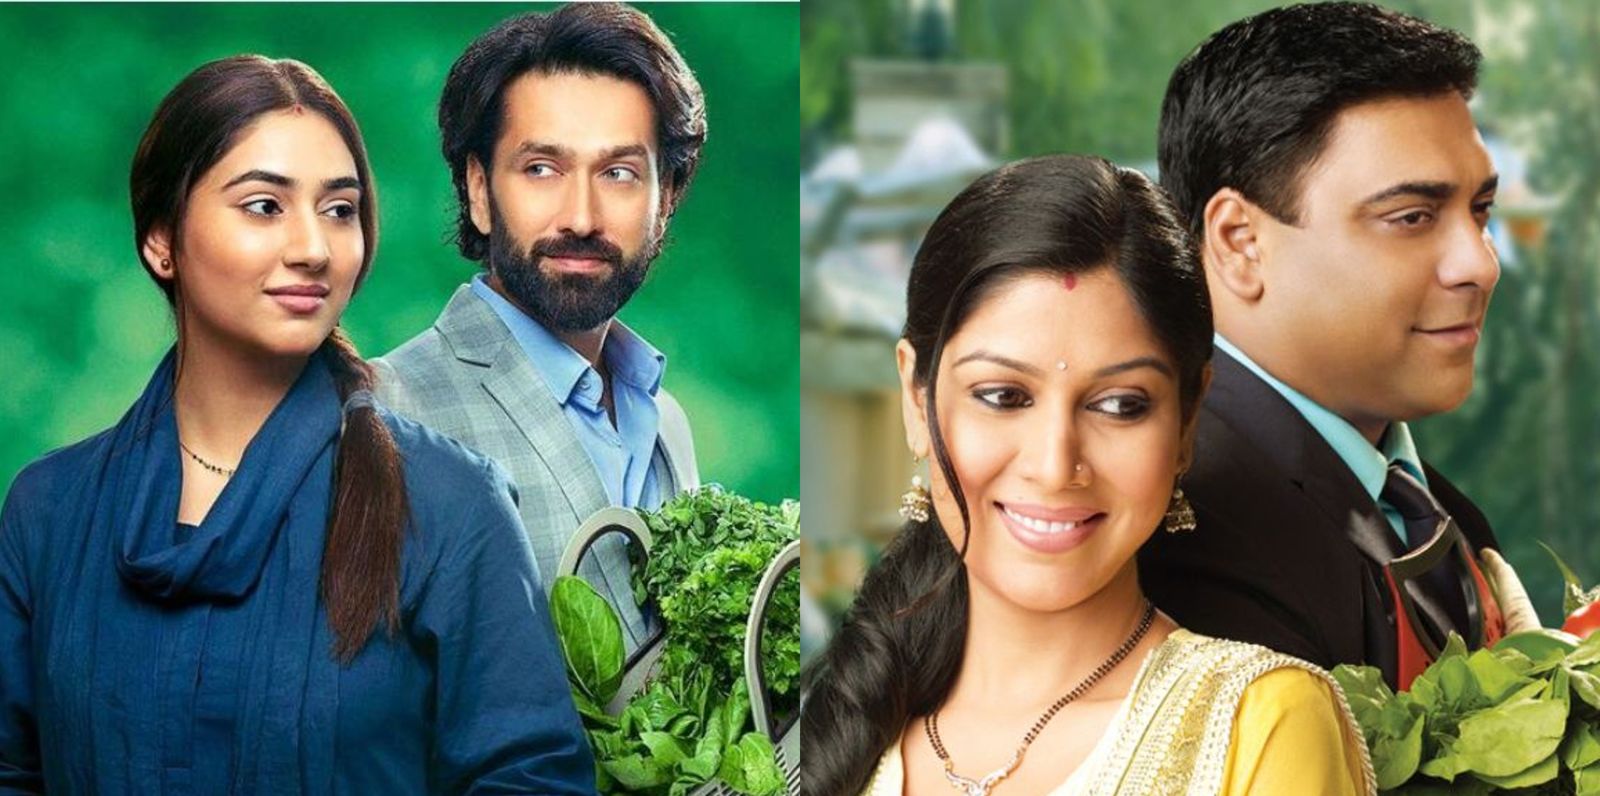 Bade Achhe Lagte Hain 2 star Nakuul Mehta on comparisons with Ram Kapoor: ‘It's a tough act to follow’